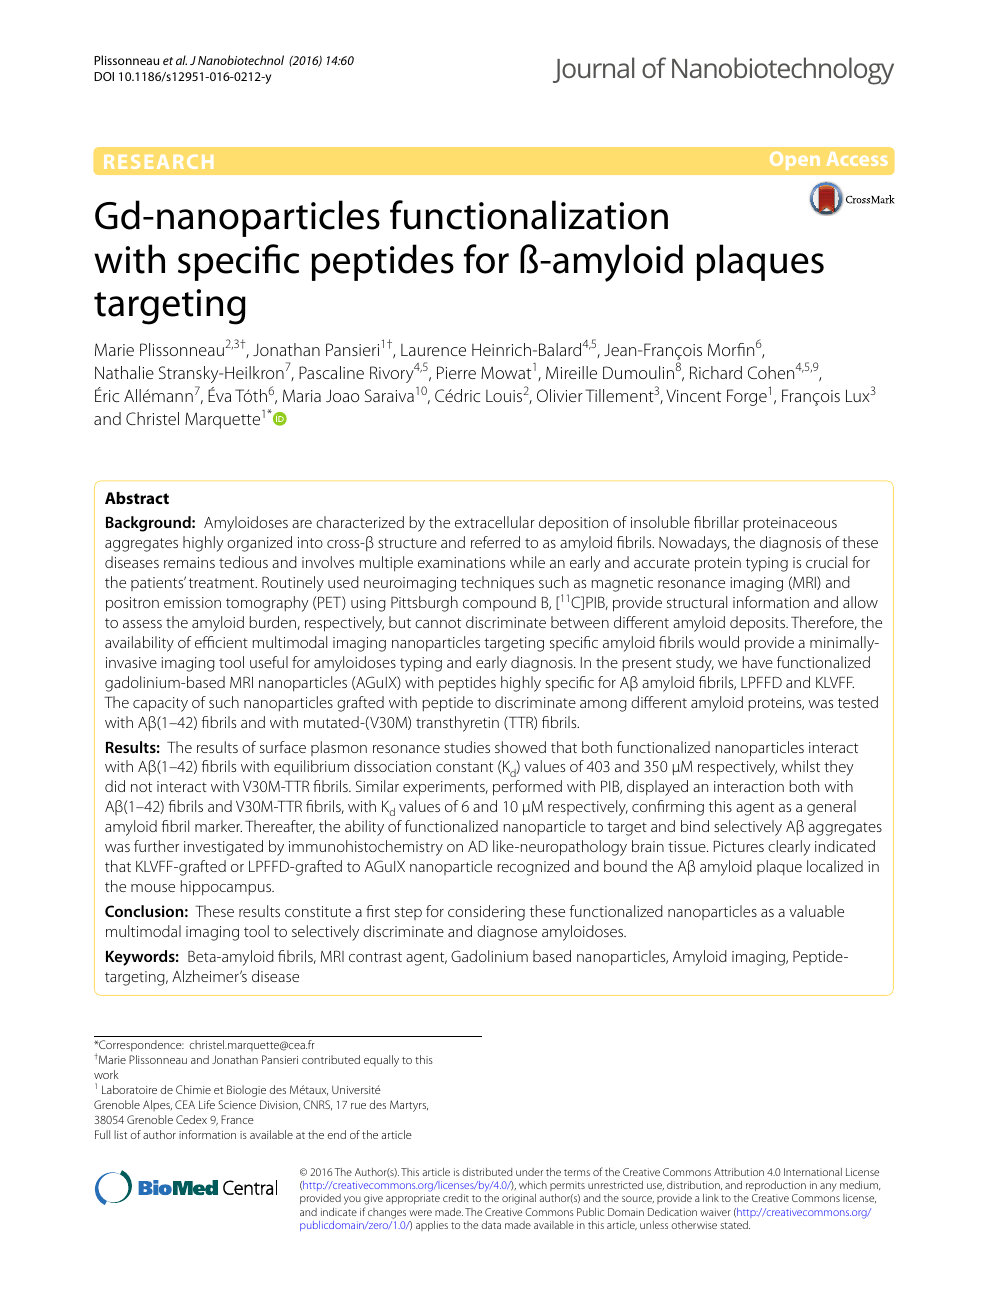 Gd Nanoparticles Functionalization With Specific Peptides For Ss Amyloid Plaques Targeting Topic Of Research Paper In Nano Technology Download Scholarly Article Pdf And Read For Free On Cyberleninka Open Science Hub